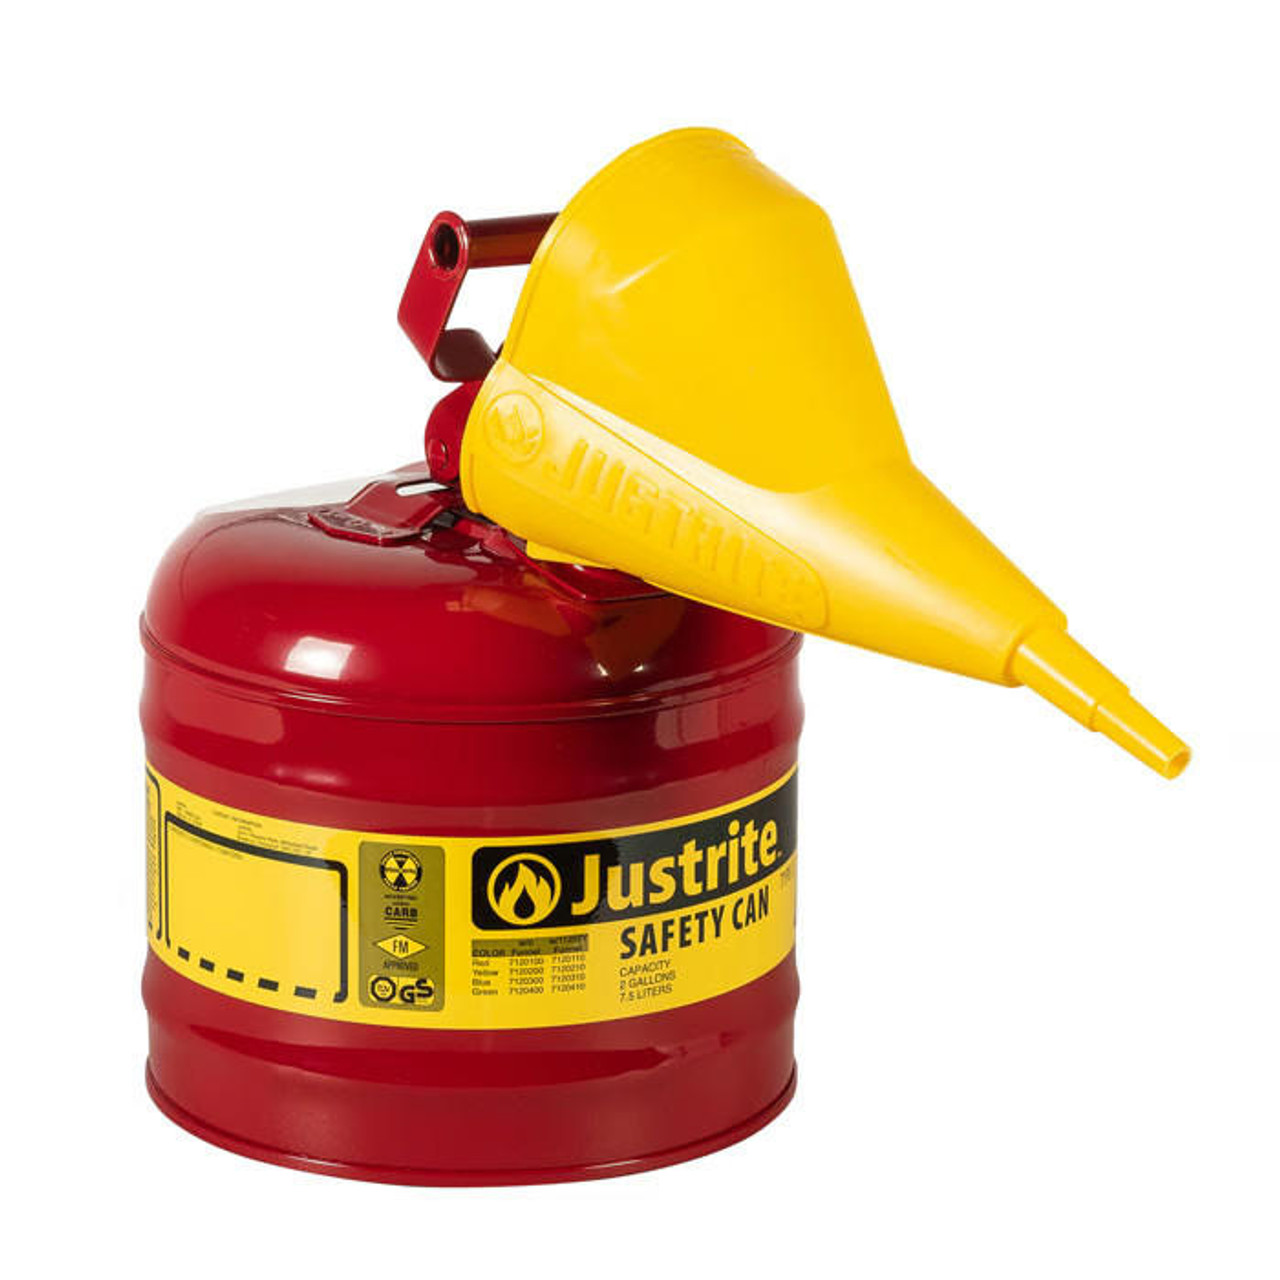 JUSTRITE 2 GAL TYPE I SAFETY CAN FUNNEL - Boss Boots